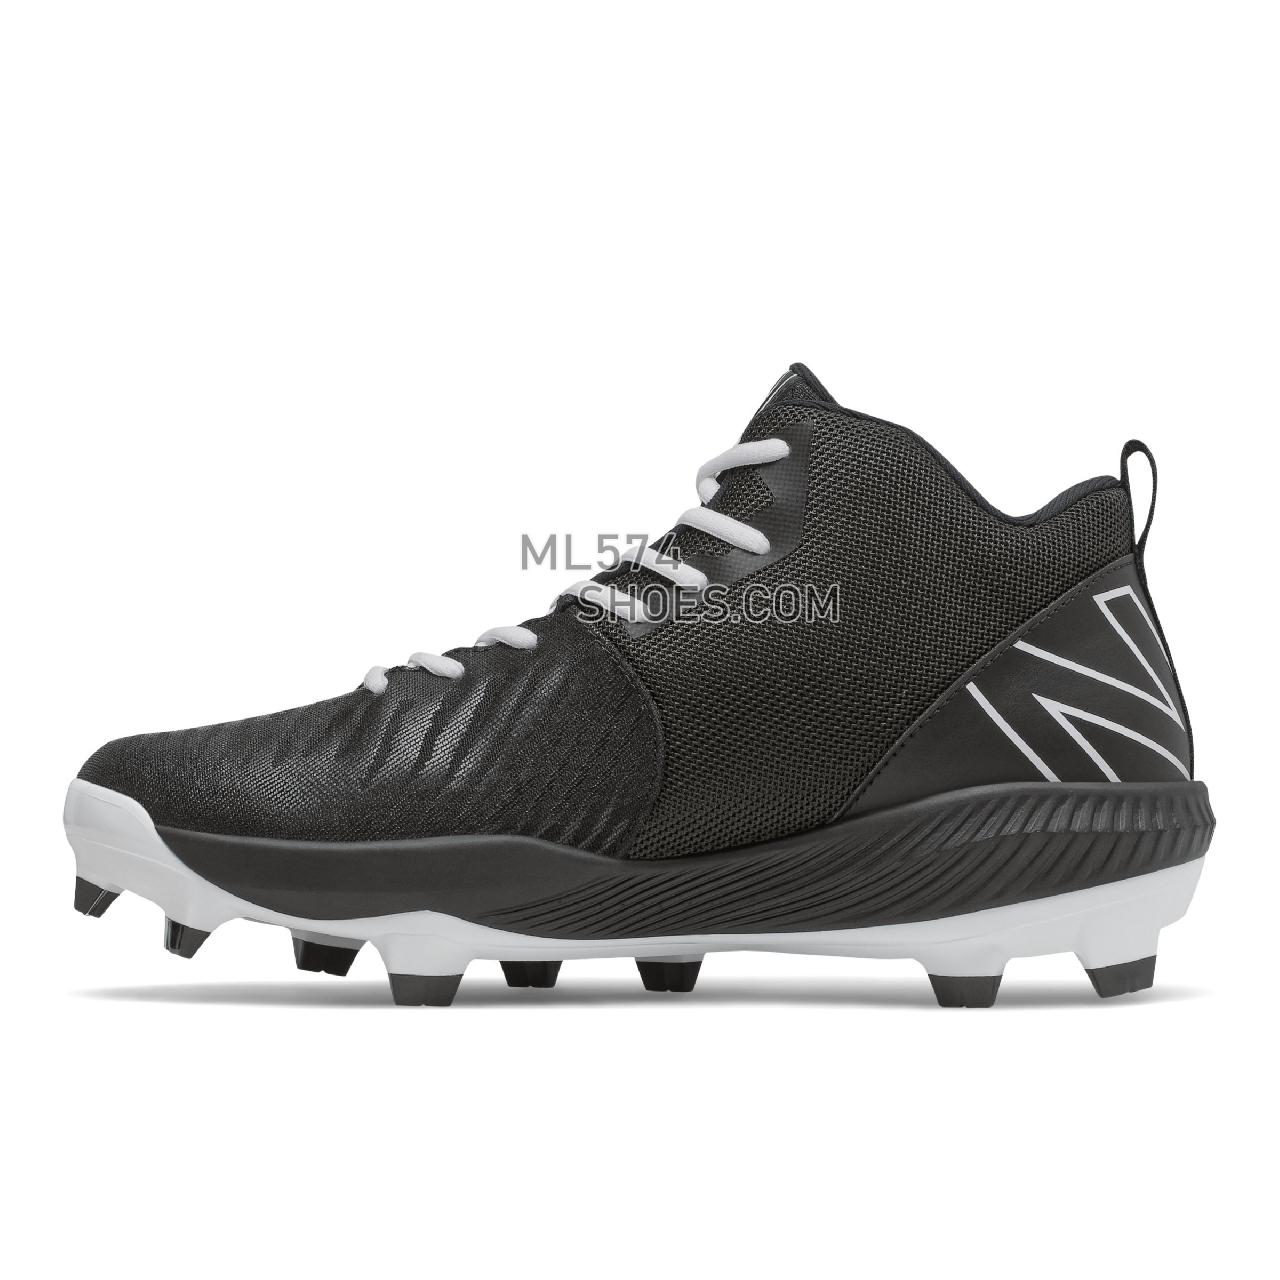 New Balance FuelCell 4040 v6 Mid-Molded - Men's Mid-Cut Baseball Cleats - Black with White - PM4040K6